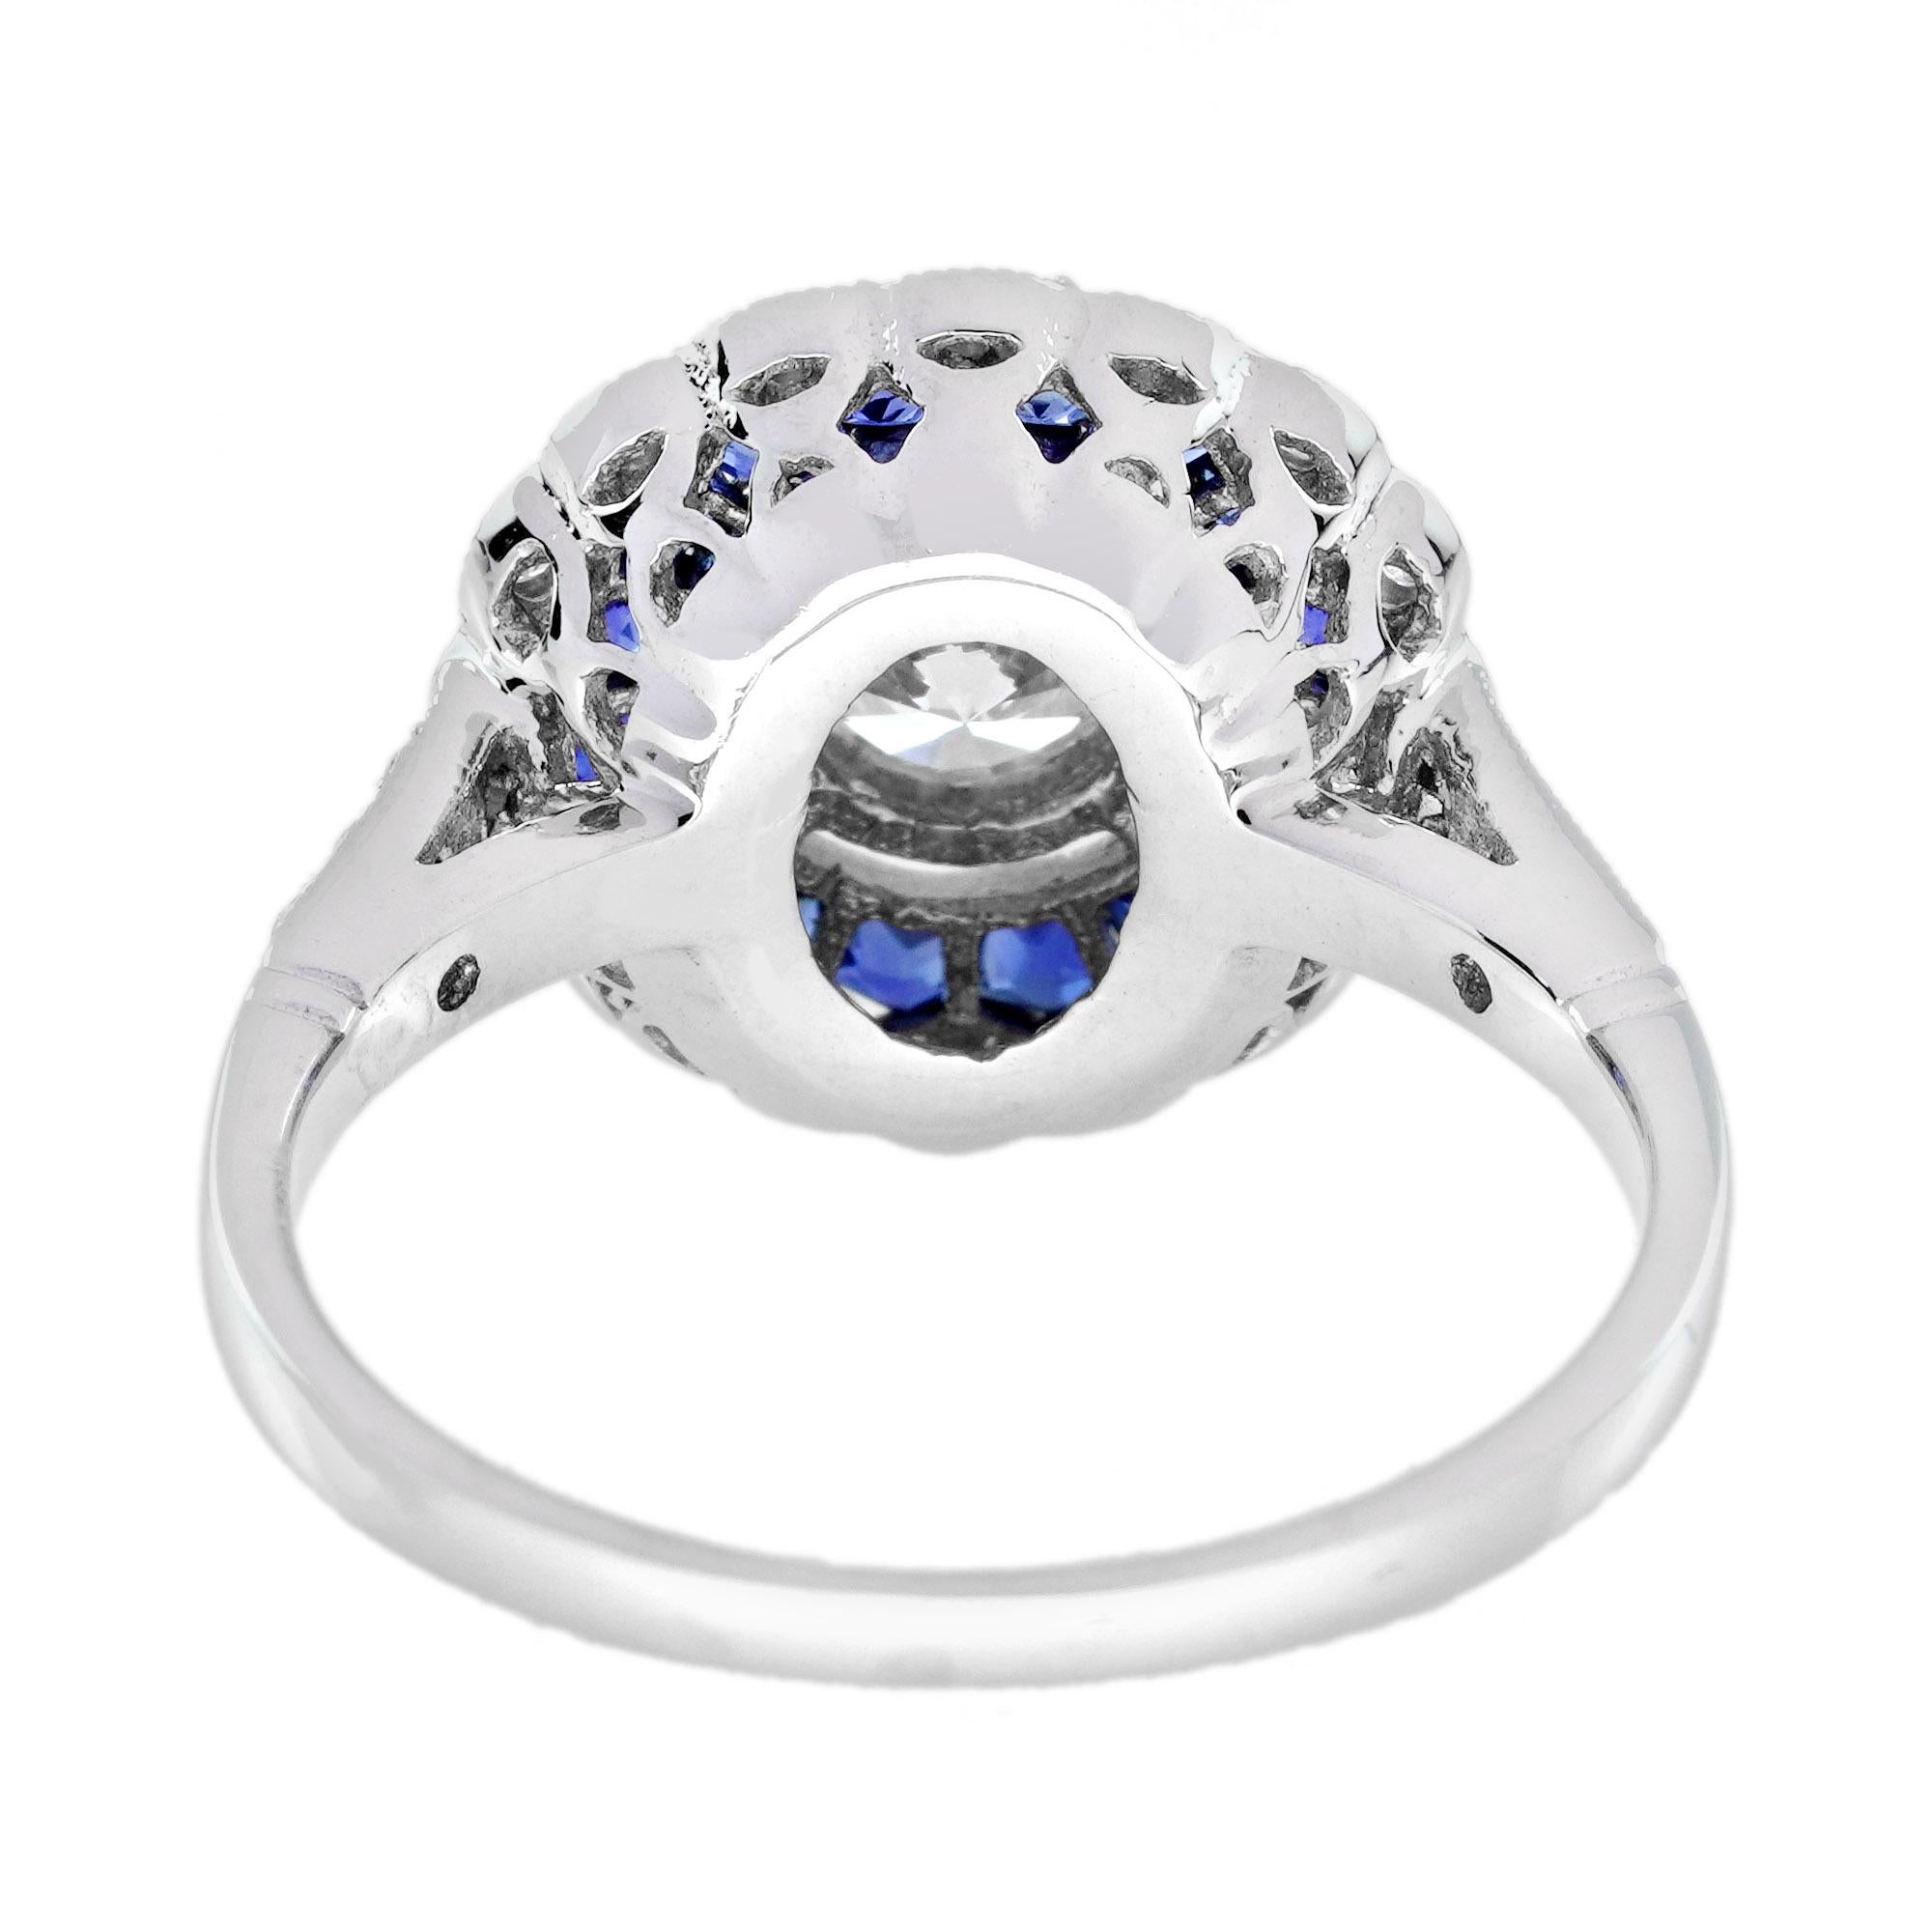 Women's 0.5 Ct Diamond Blue Sapphire Art Deco Style Engagement Ring in 18K White Gold For Sale